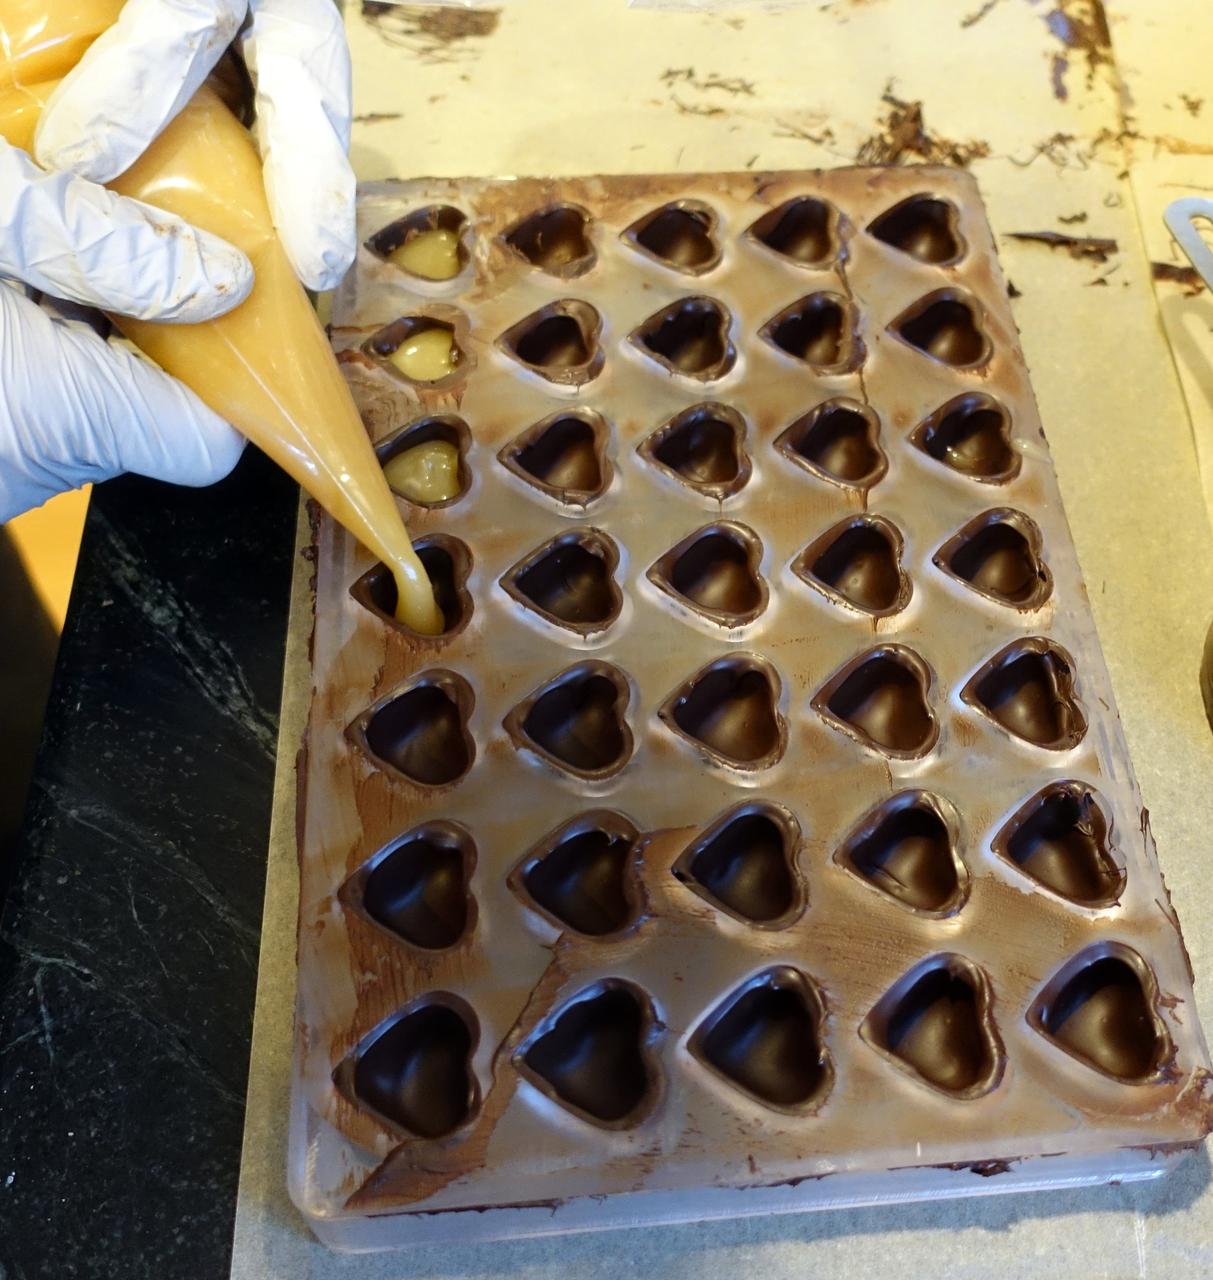 Filling the heart shells with caramel. It looks smooth here, but crystallized a bit over the course of a few days. Should have used some invert sugar, like corn syrup, instead of just sugar.